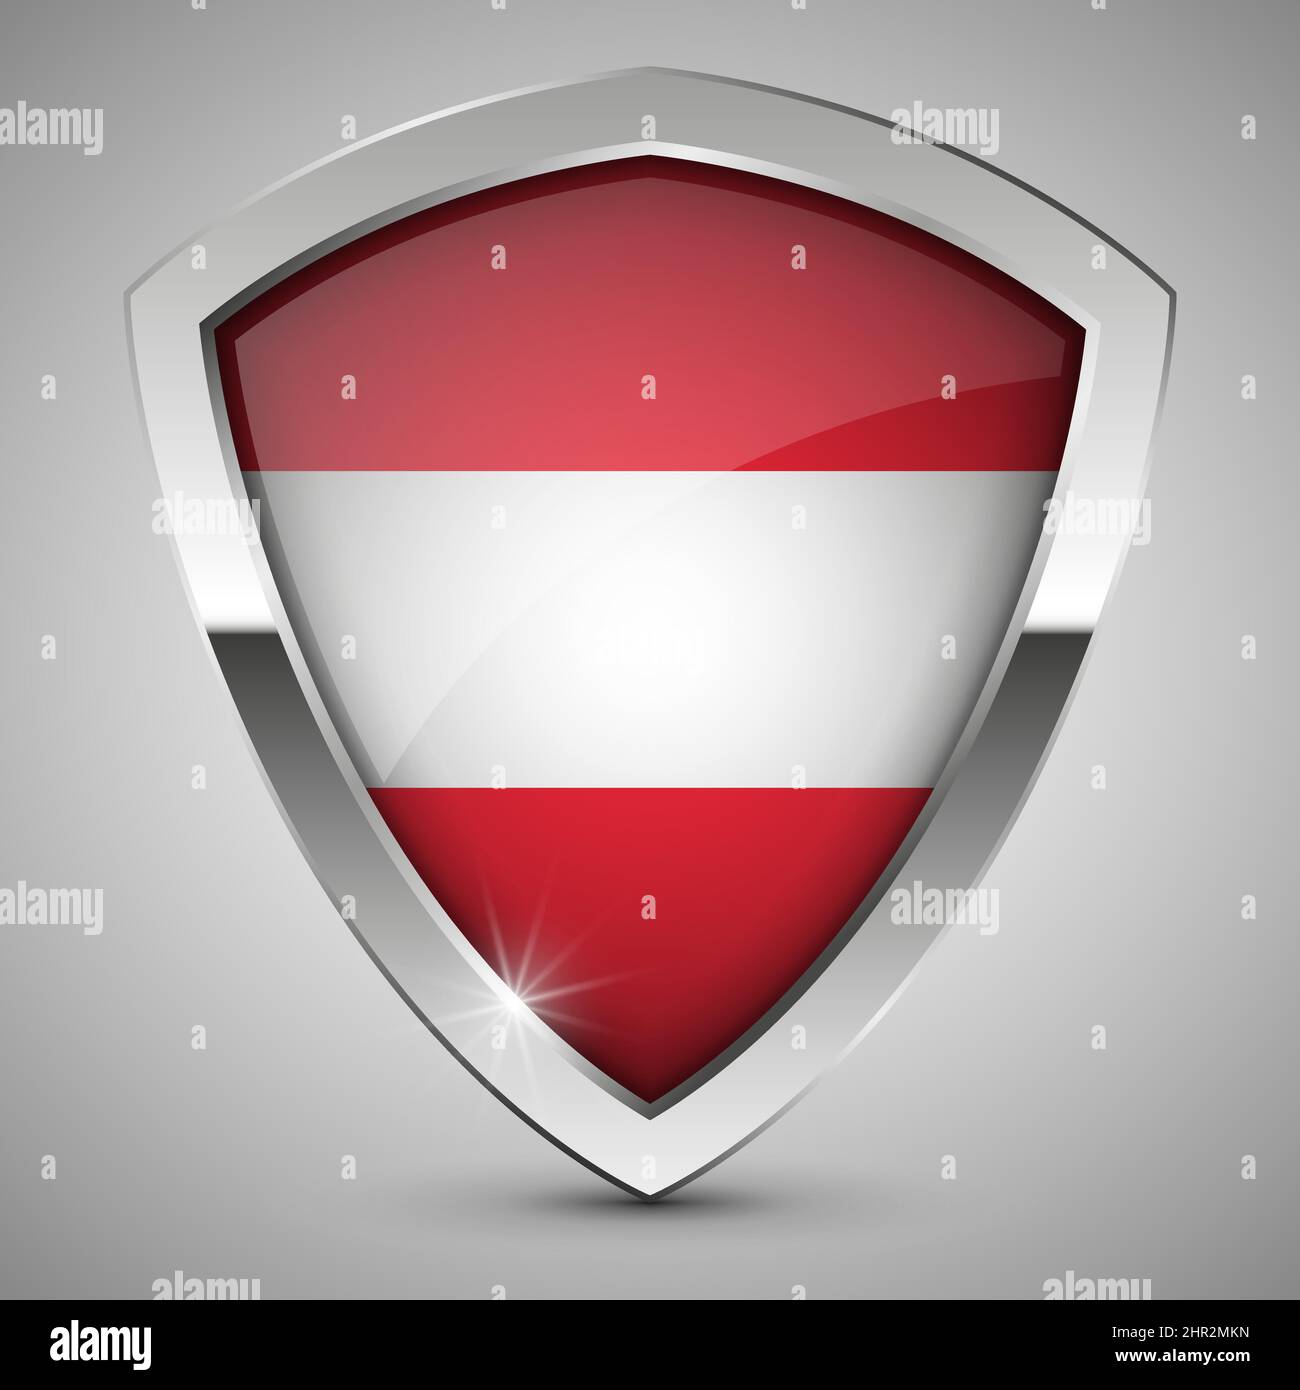 EPS10 Vector Patriotic shield with flag of Austria. An element of impact for the use you want to make of it. Stock Vector